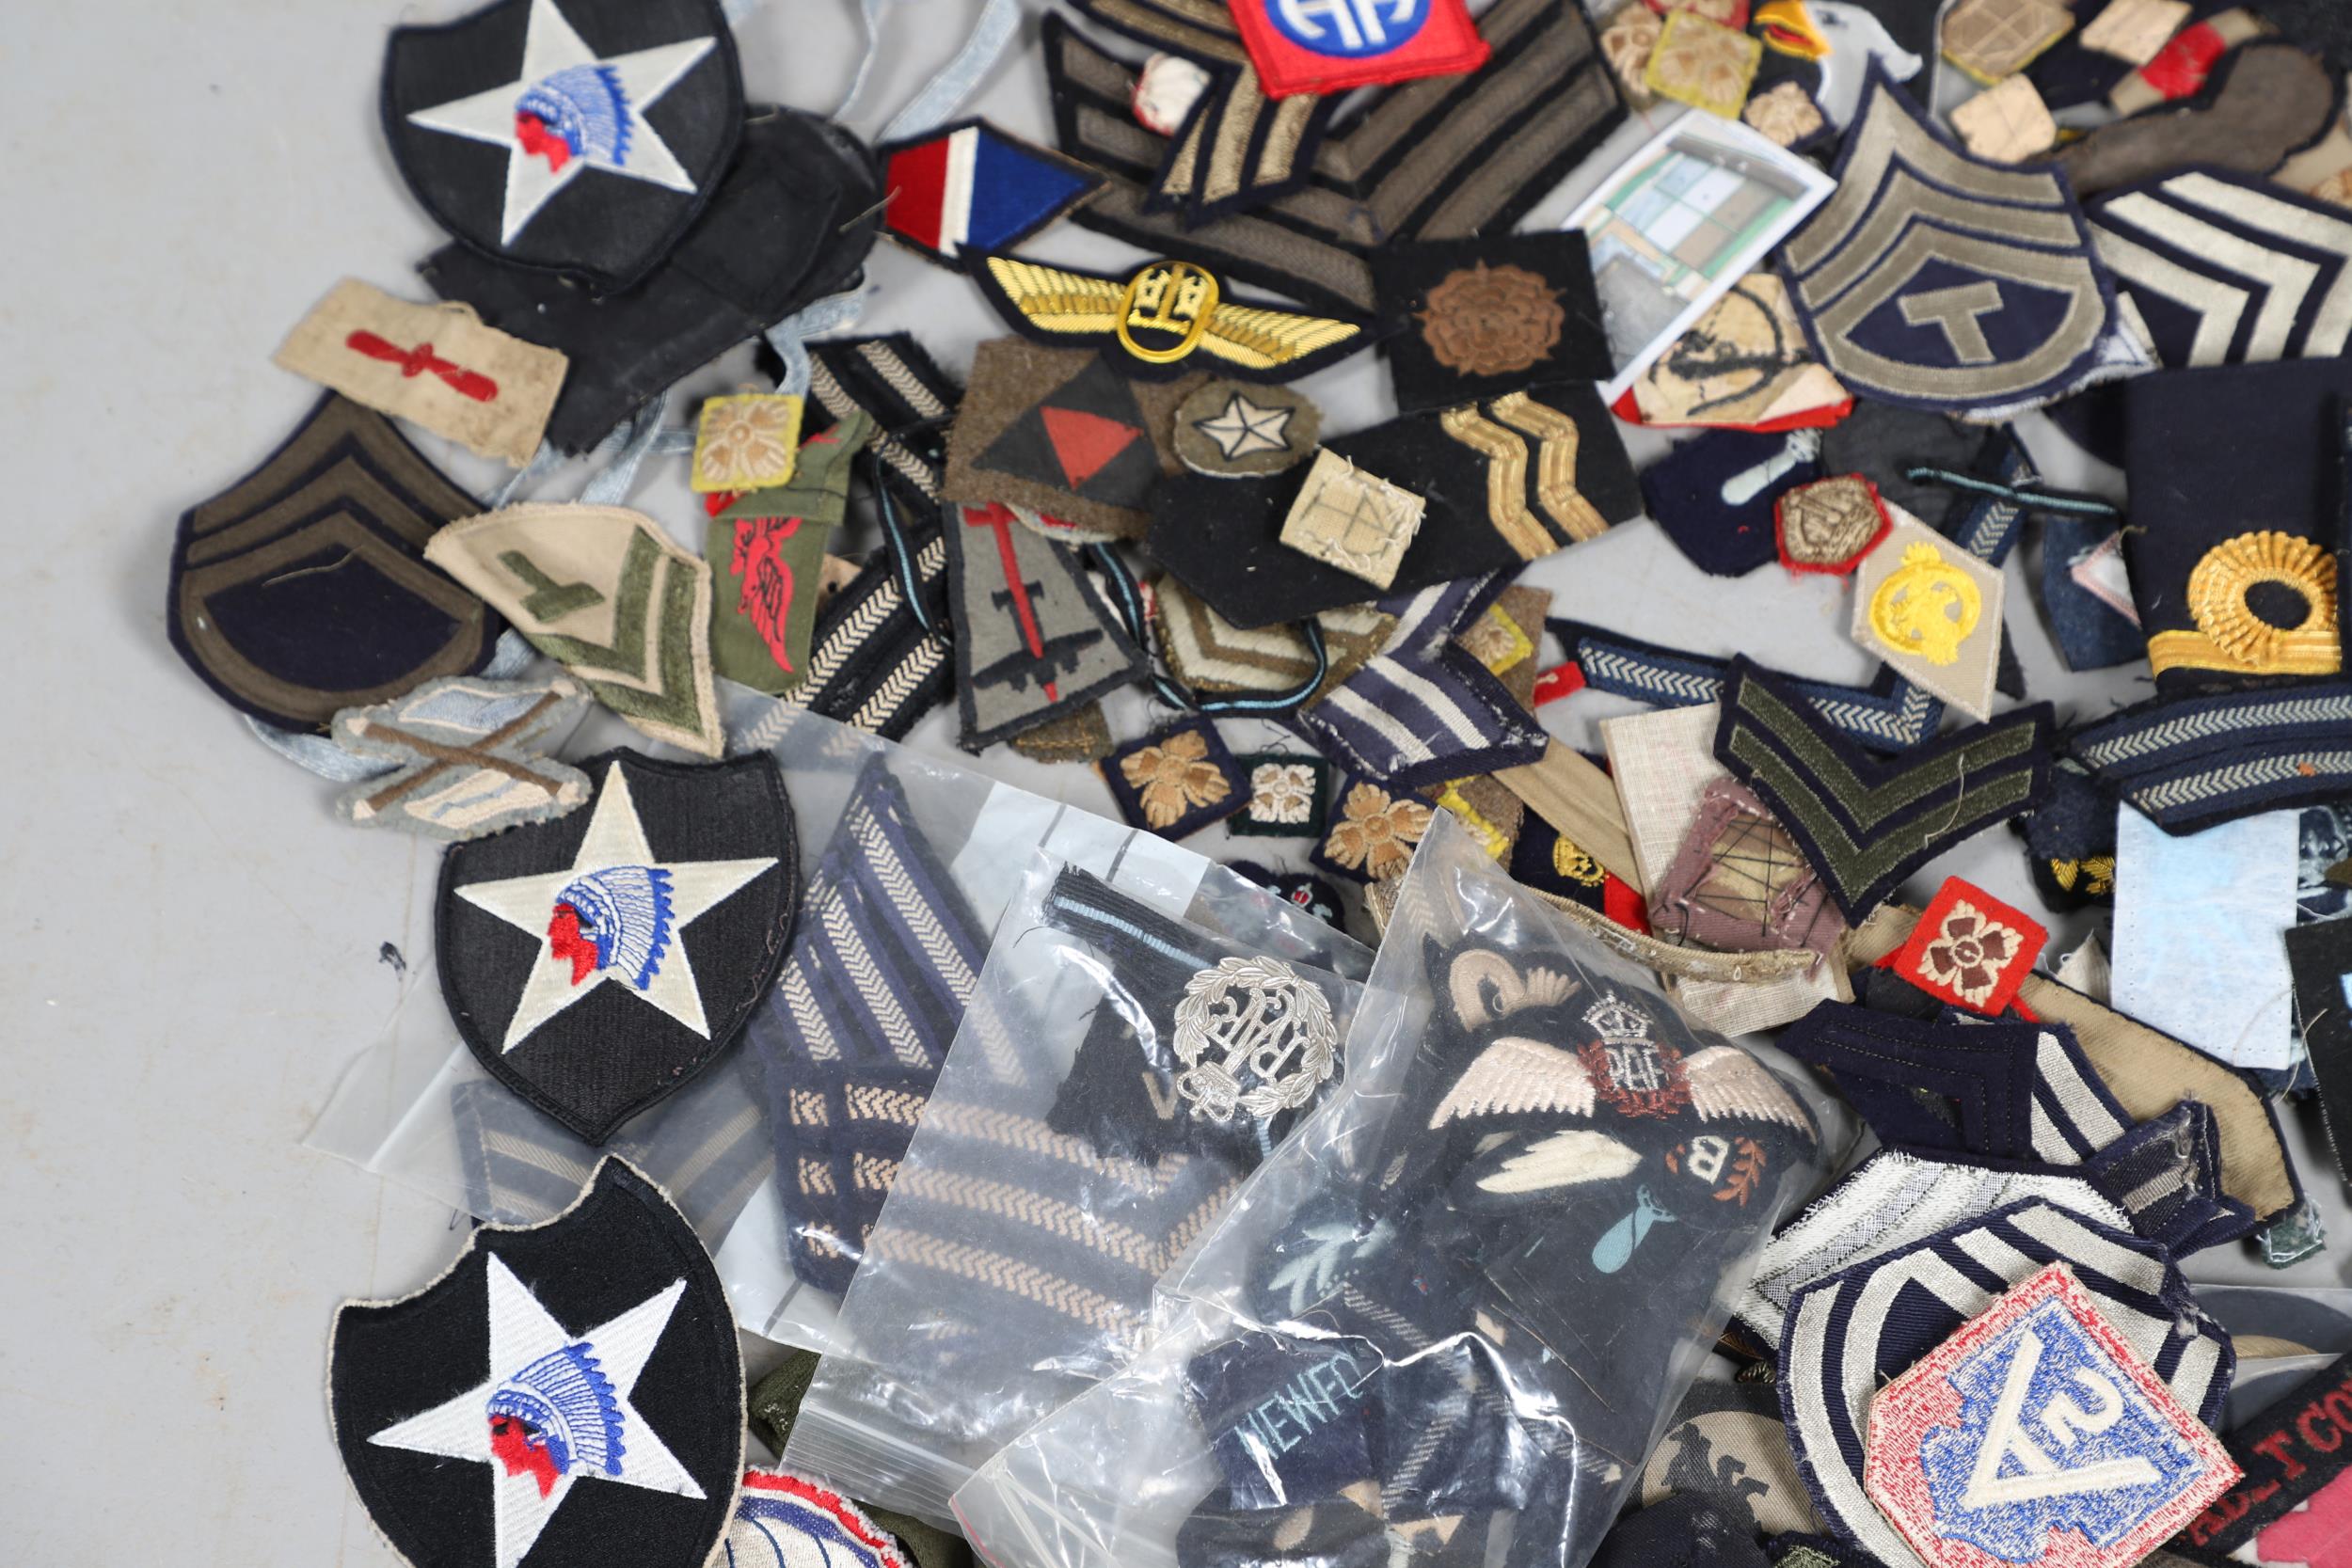 AN EXTENSIVE COLLECTION OF ARMY AND AIR FORCE UNIFORM PATCHES AND RANK INSIGNIA. - Image 5 of 14